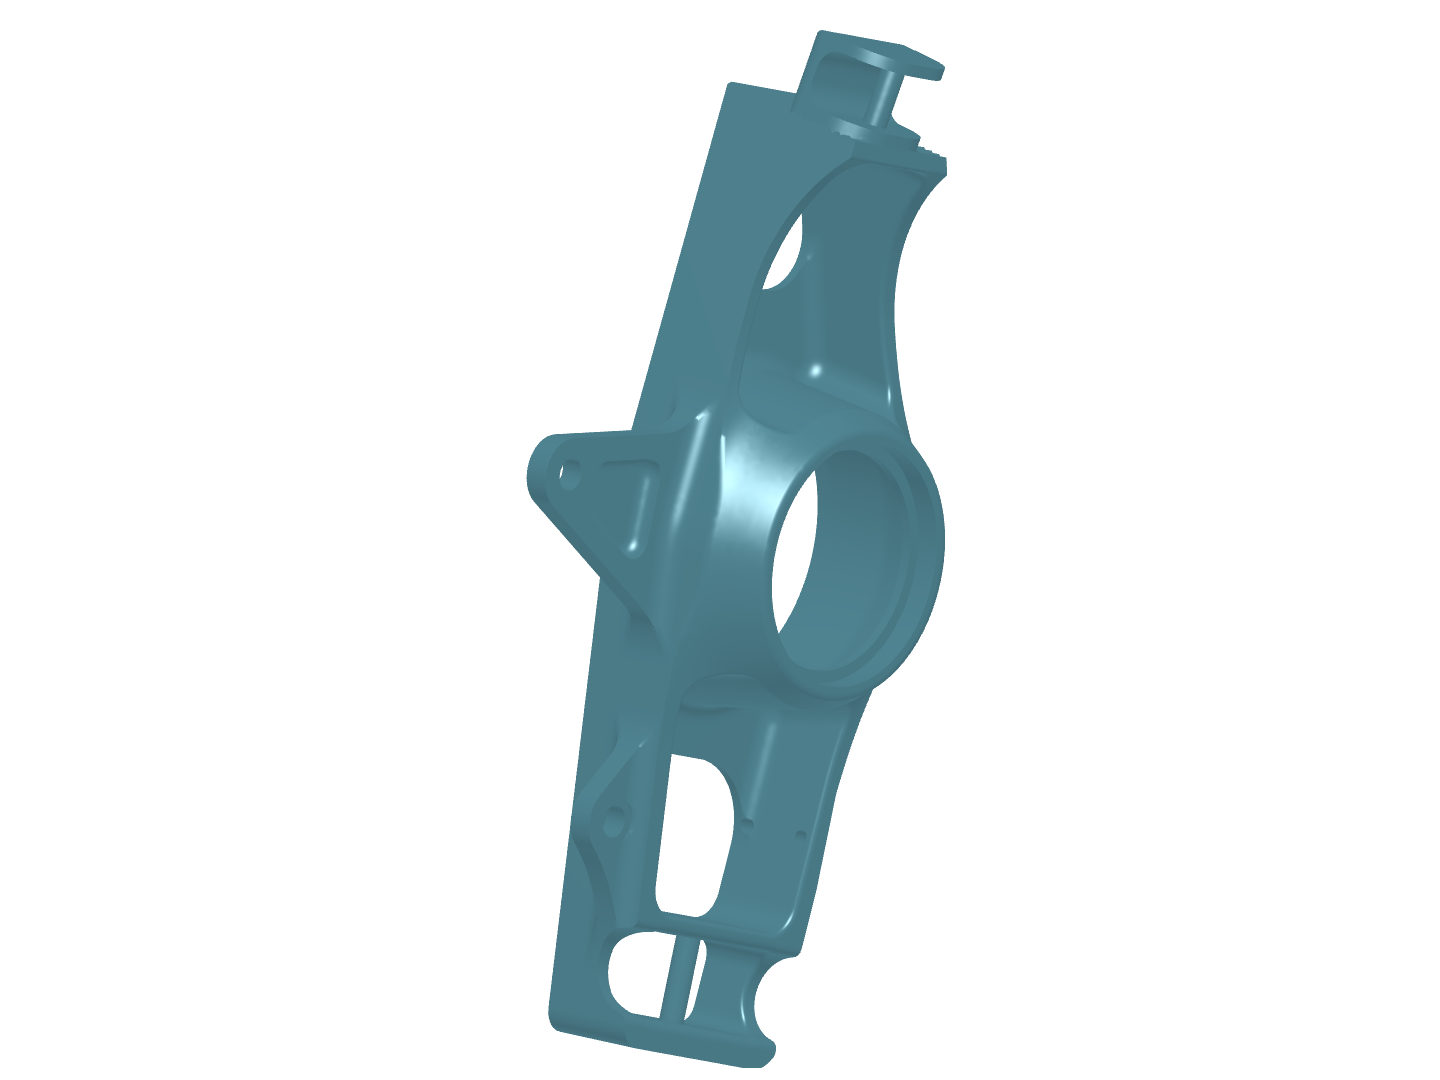 FEA Front Upright Assembly - Course image